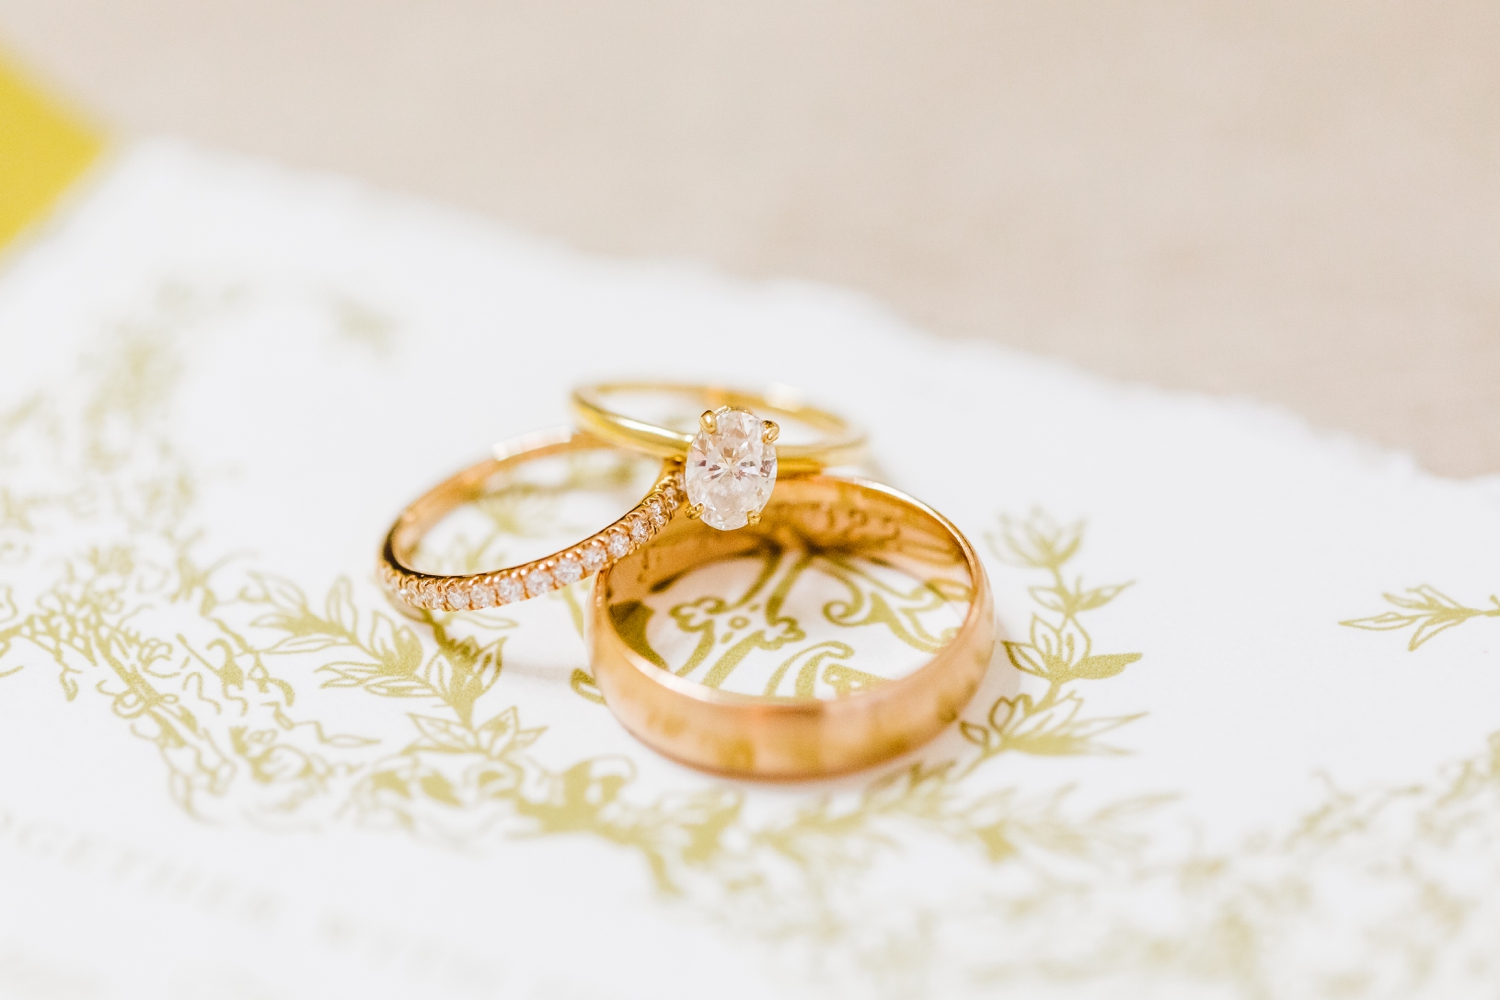 Bride and groom's gold wedding rings set on top of wedding invitation | Brooke Michelle Photo